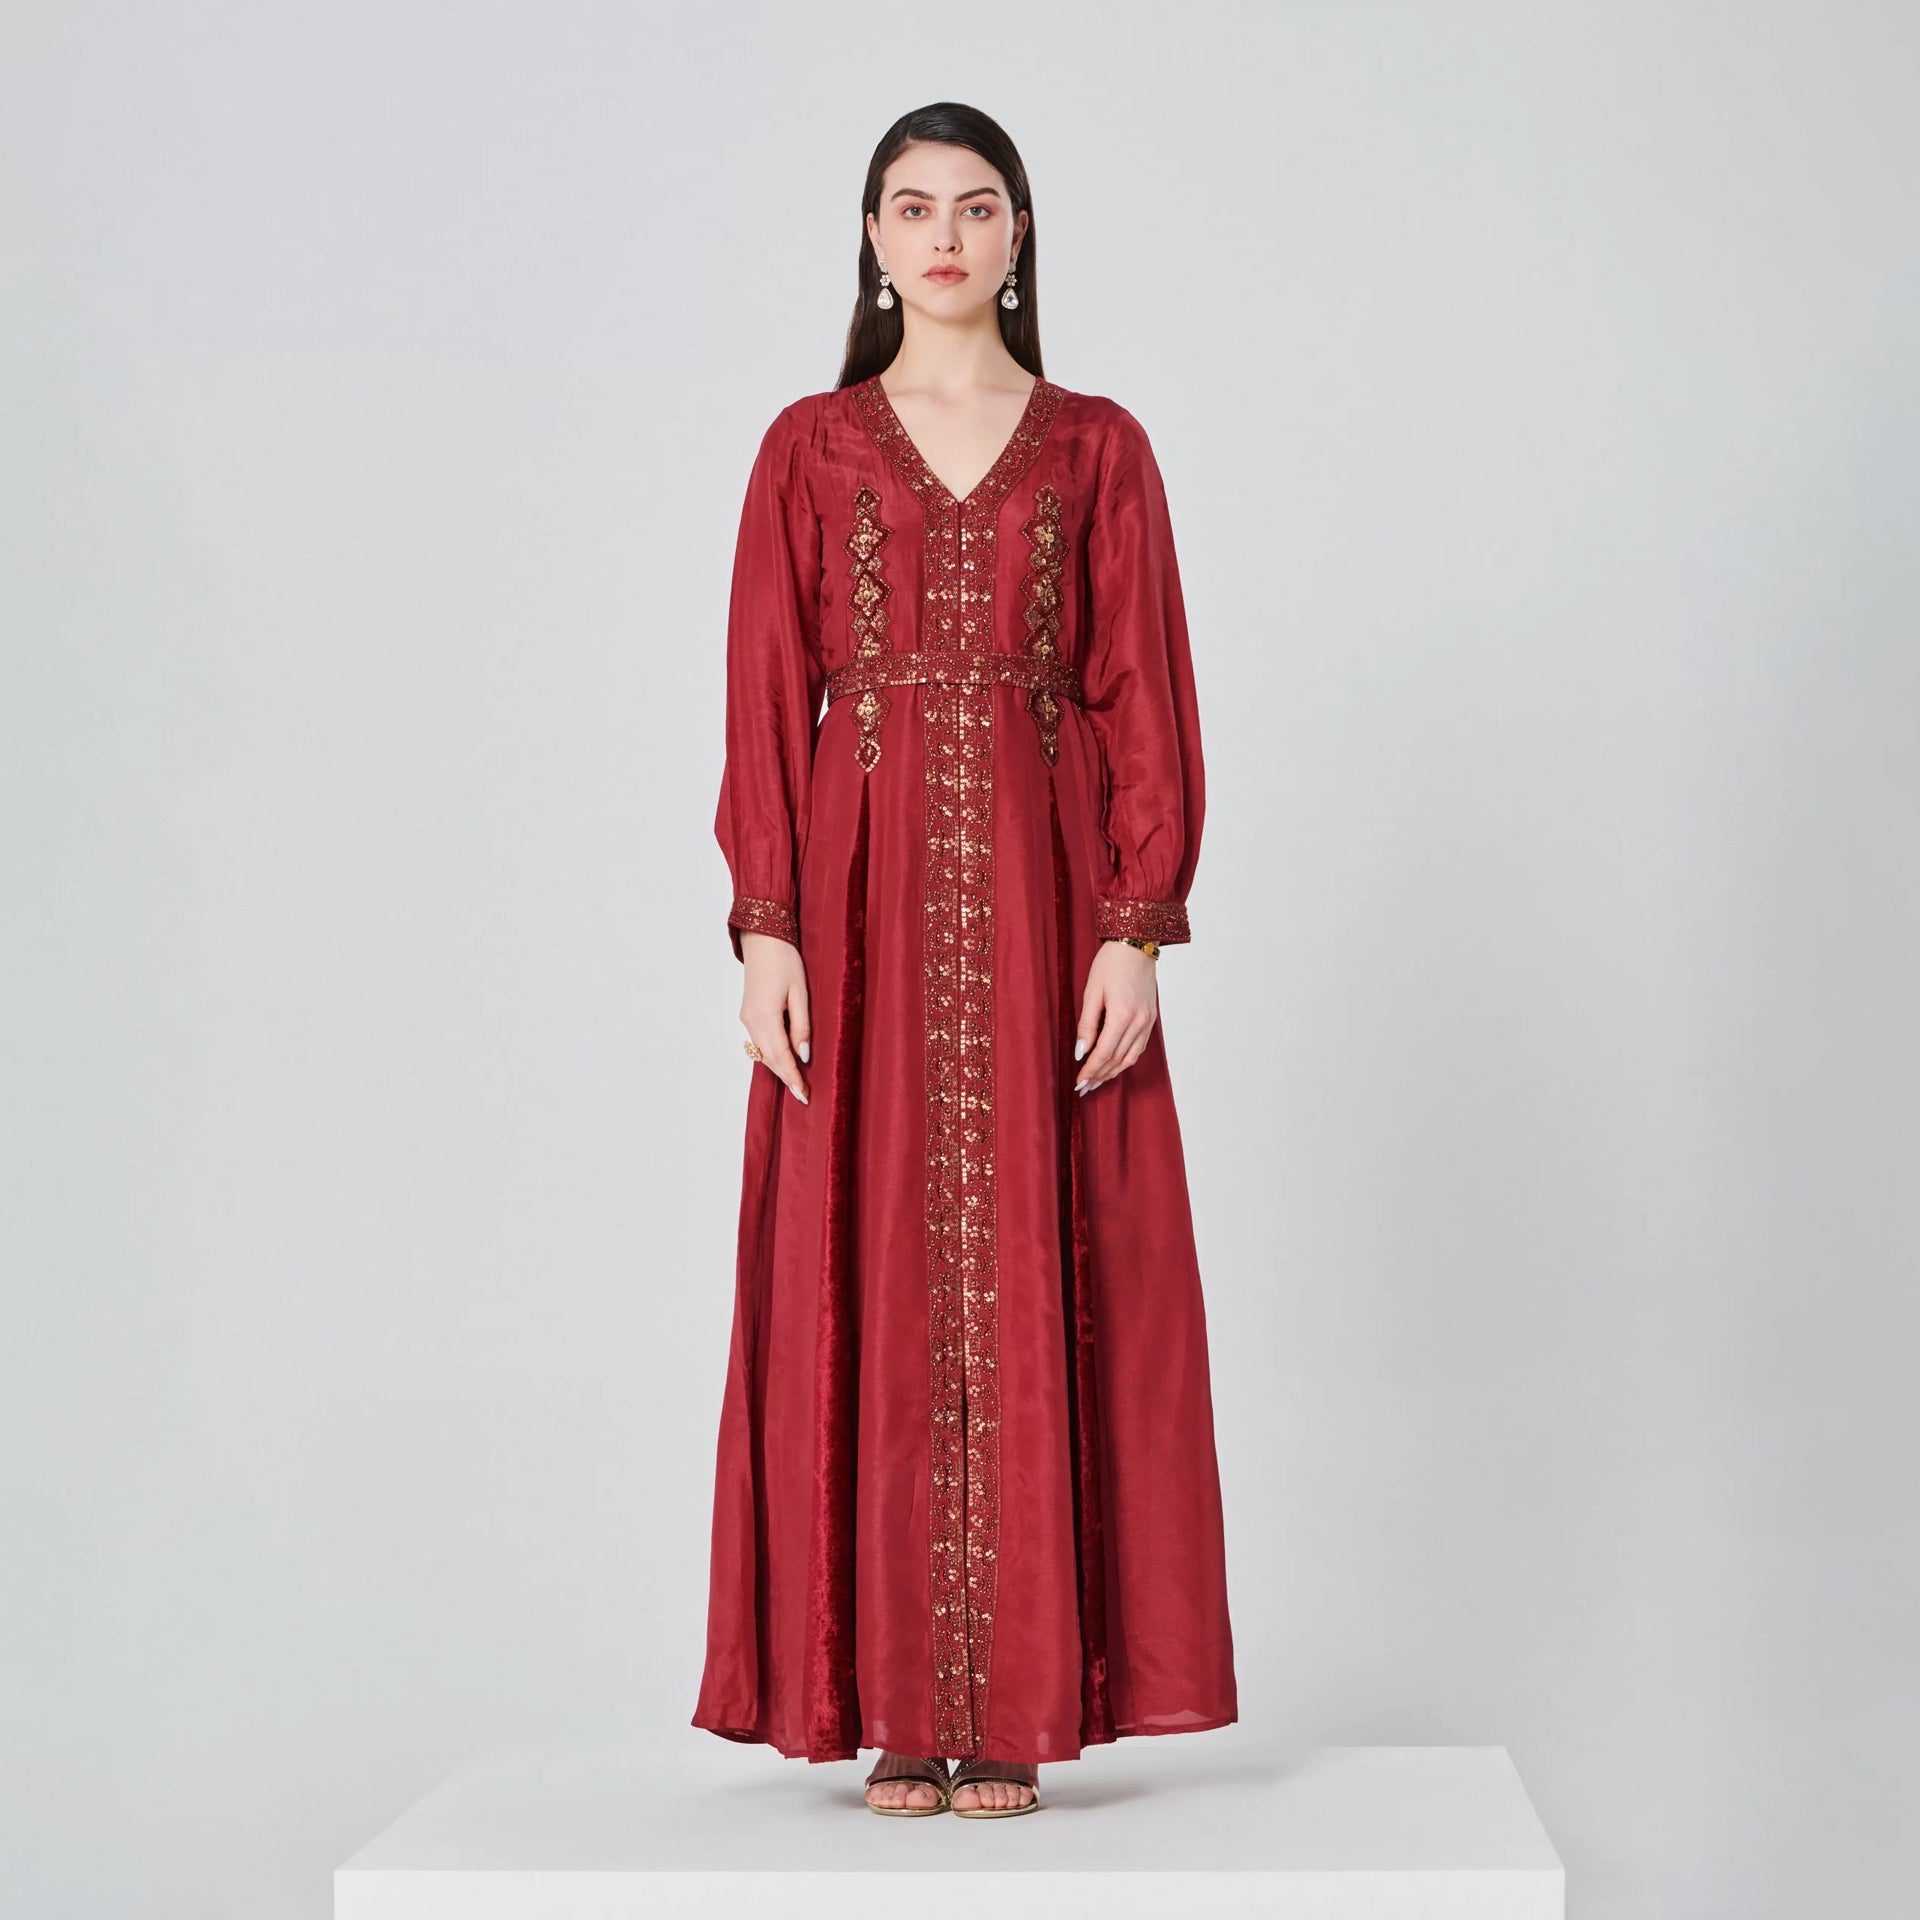 Burgundy Carmit Dress with Long Sleeves and Gold Embroidery From Shalky